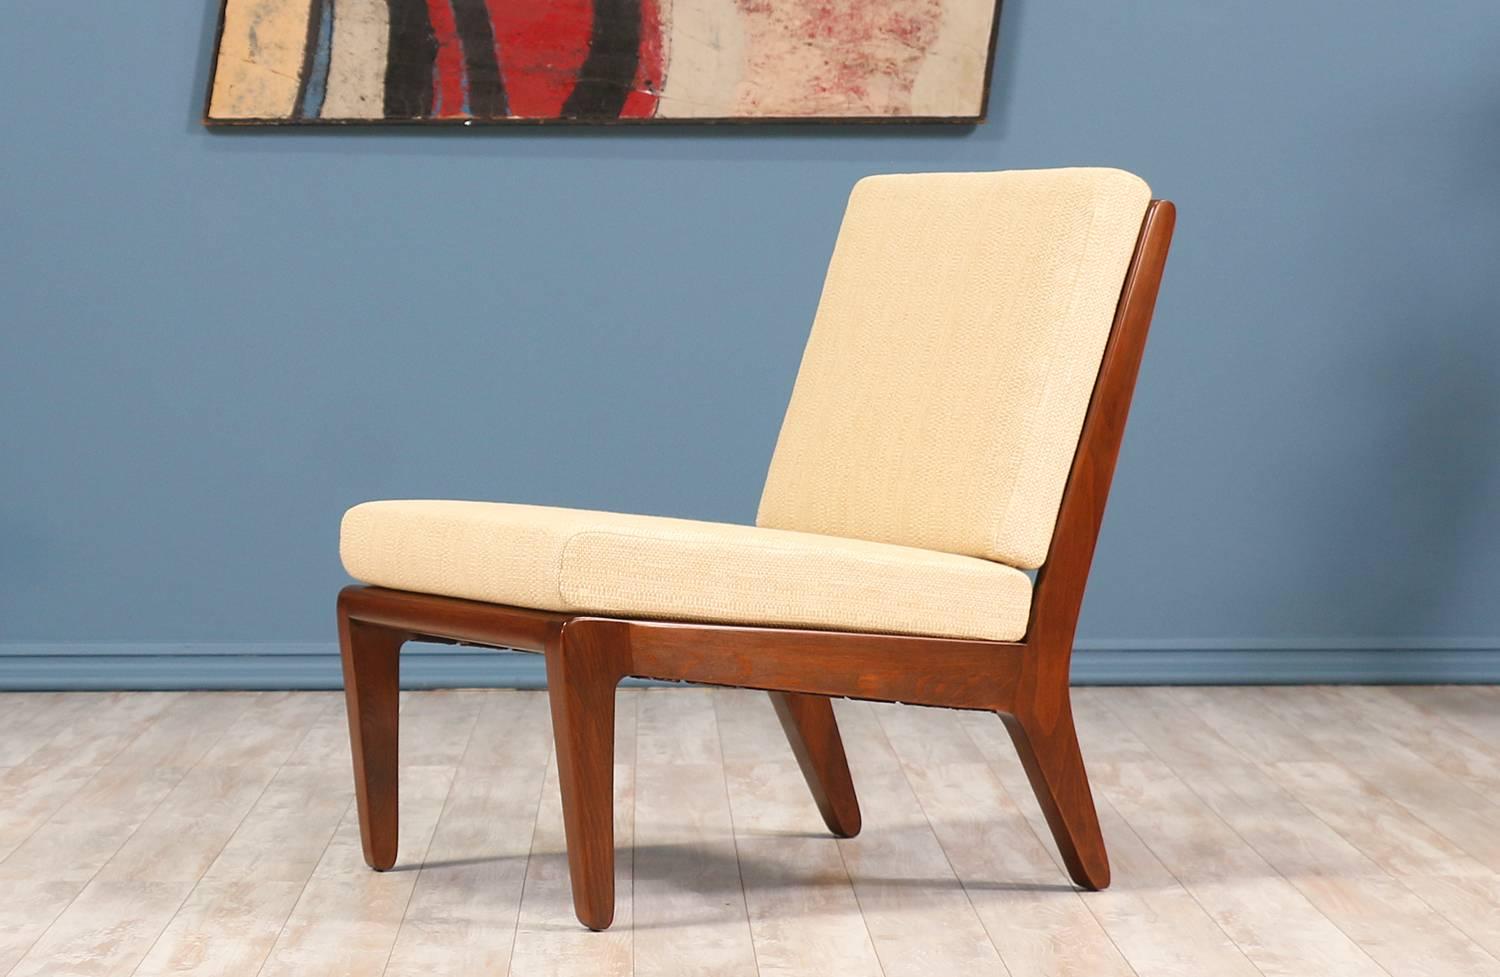 Lounge chair designed by Edward J. Wormley for Drexels “Precedent” line in the United States circa 1940’s. Featuring a walnut-stained beech wood frame with a slatted back for support and angled tapered legs. The cushions have been replaced and